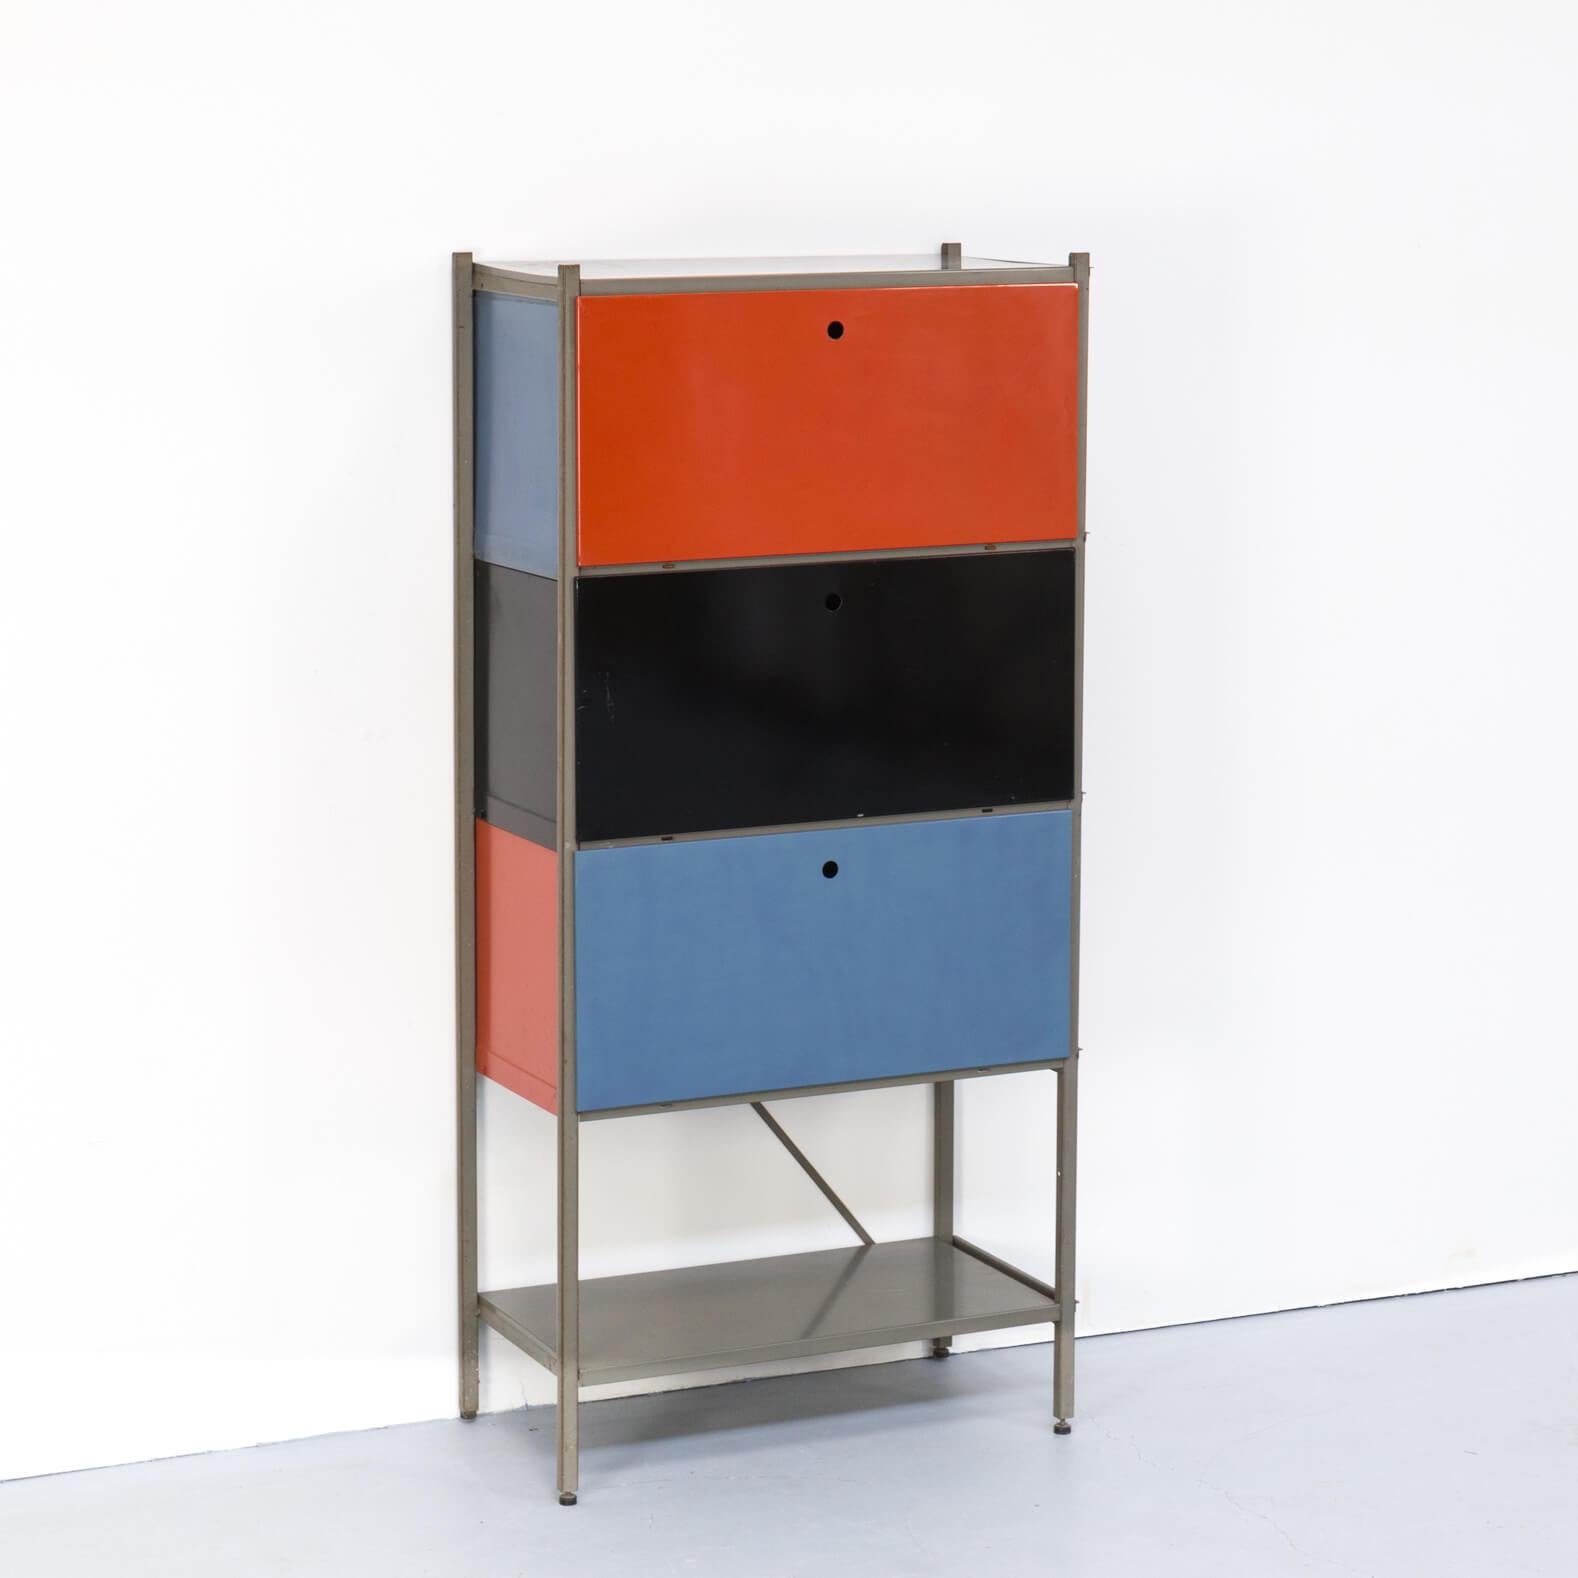 1950s Wim Rietveld model 663 wall unit for Gispen. This original model 663 storage system has been designed in 1958 and has been manufactured in the 1960s.